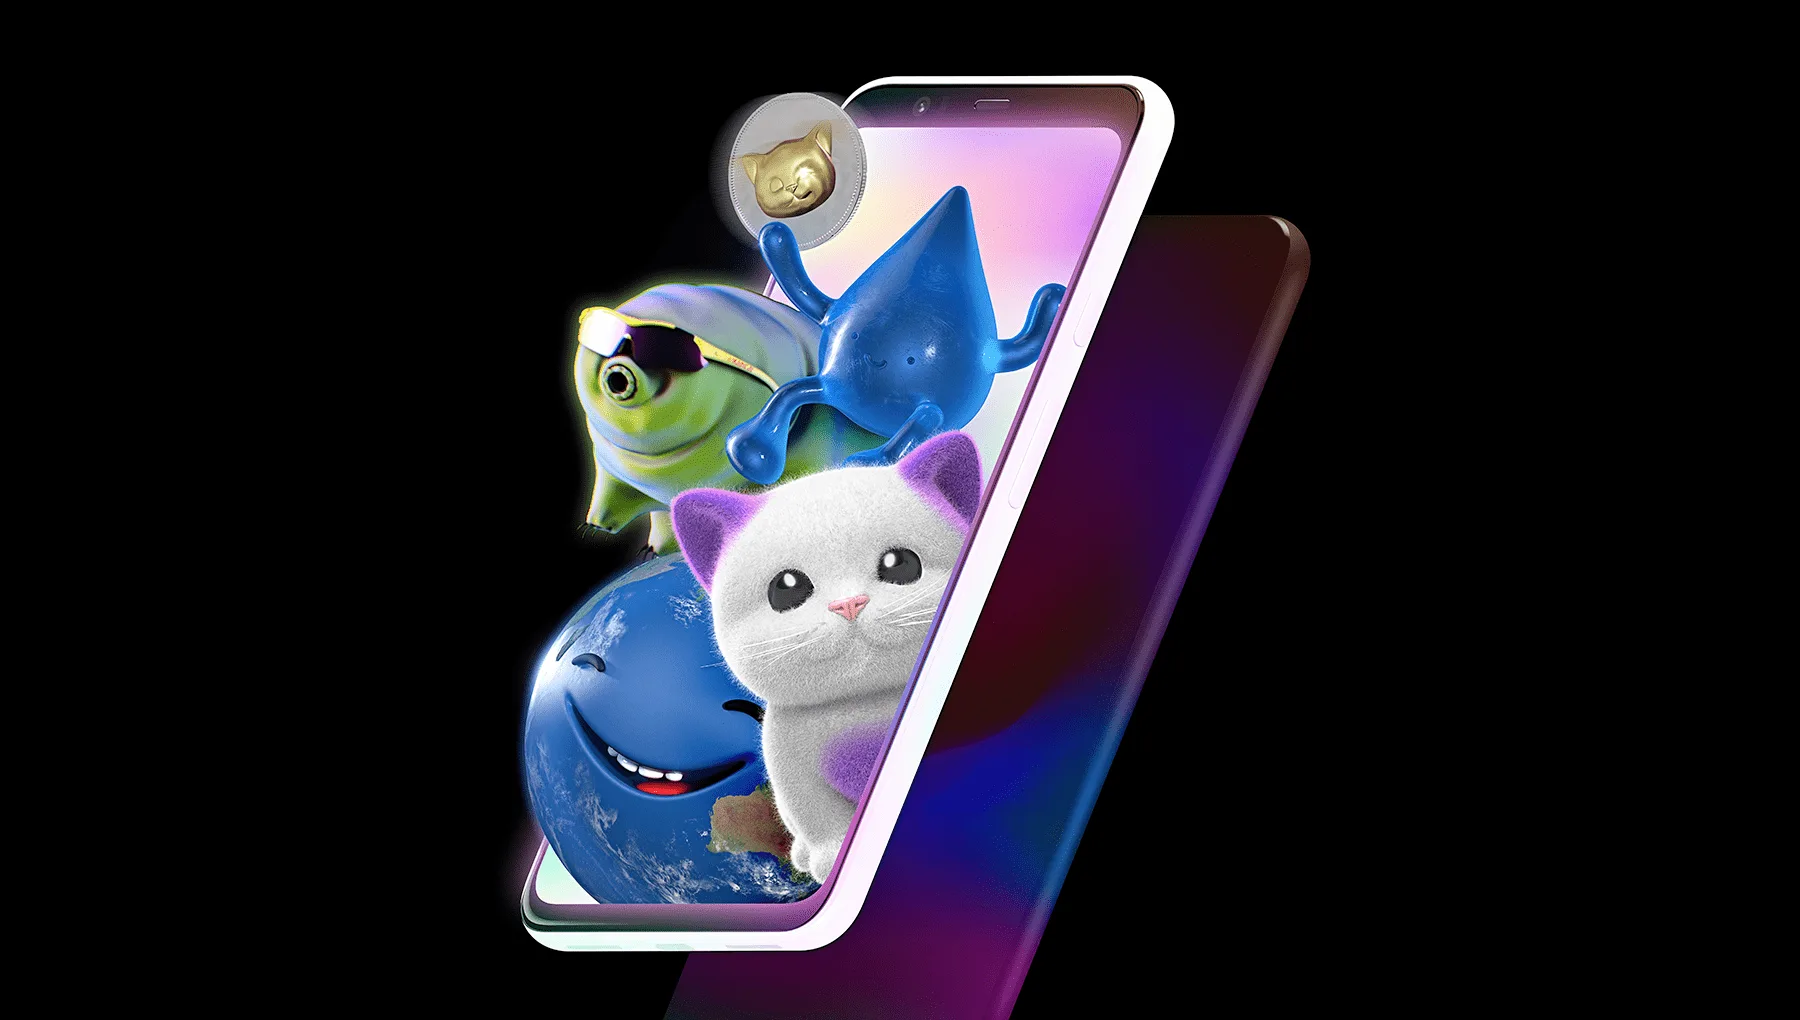 A water drop, cat, smiling Earth, shiny coin and tardigrade in sunglasses float out of a luminous phone screen.